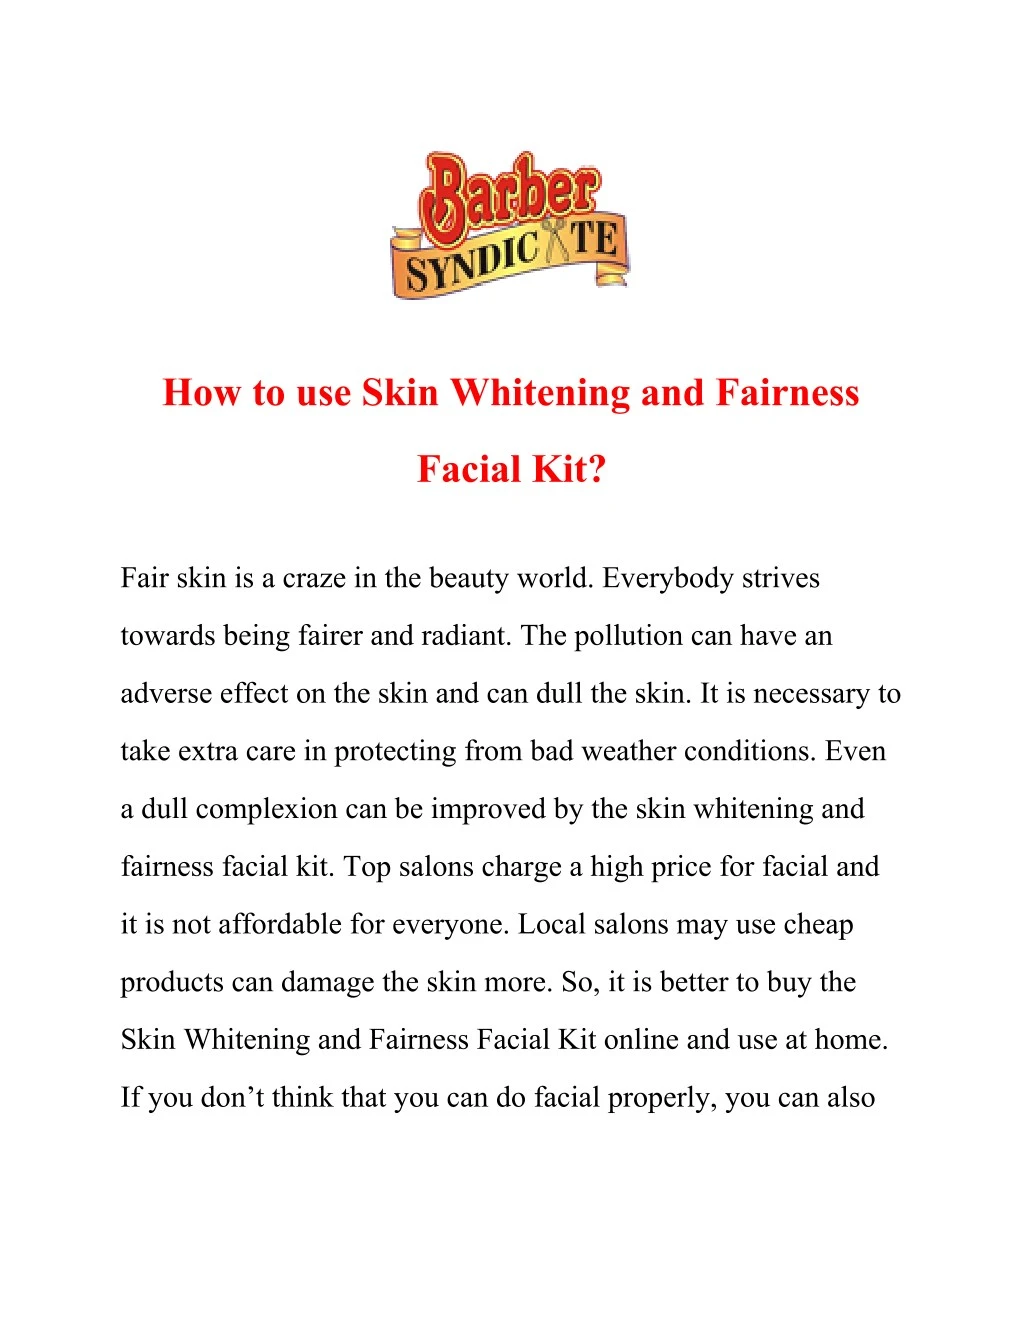 how to use skin whitening and fairness